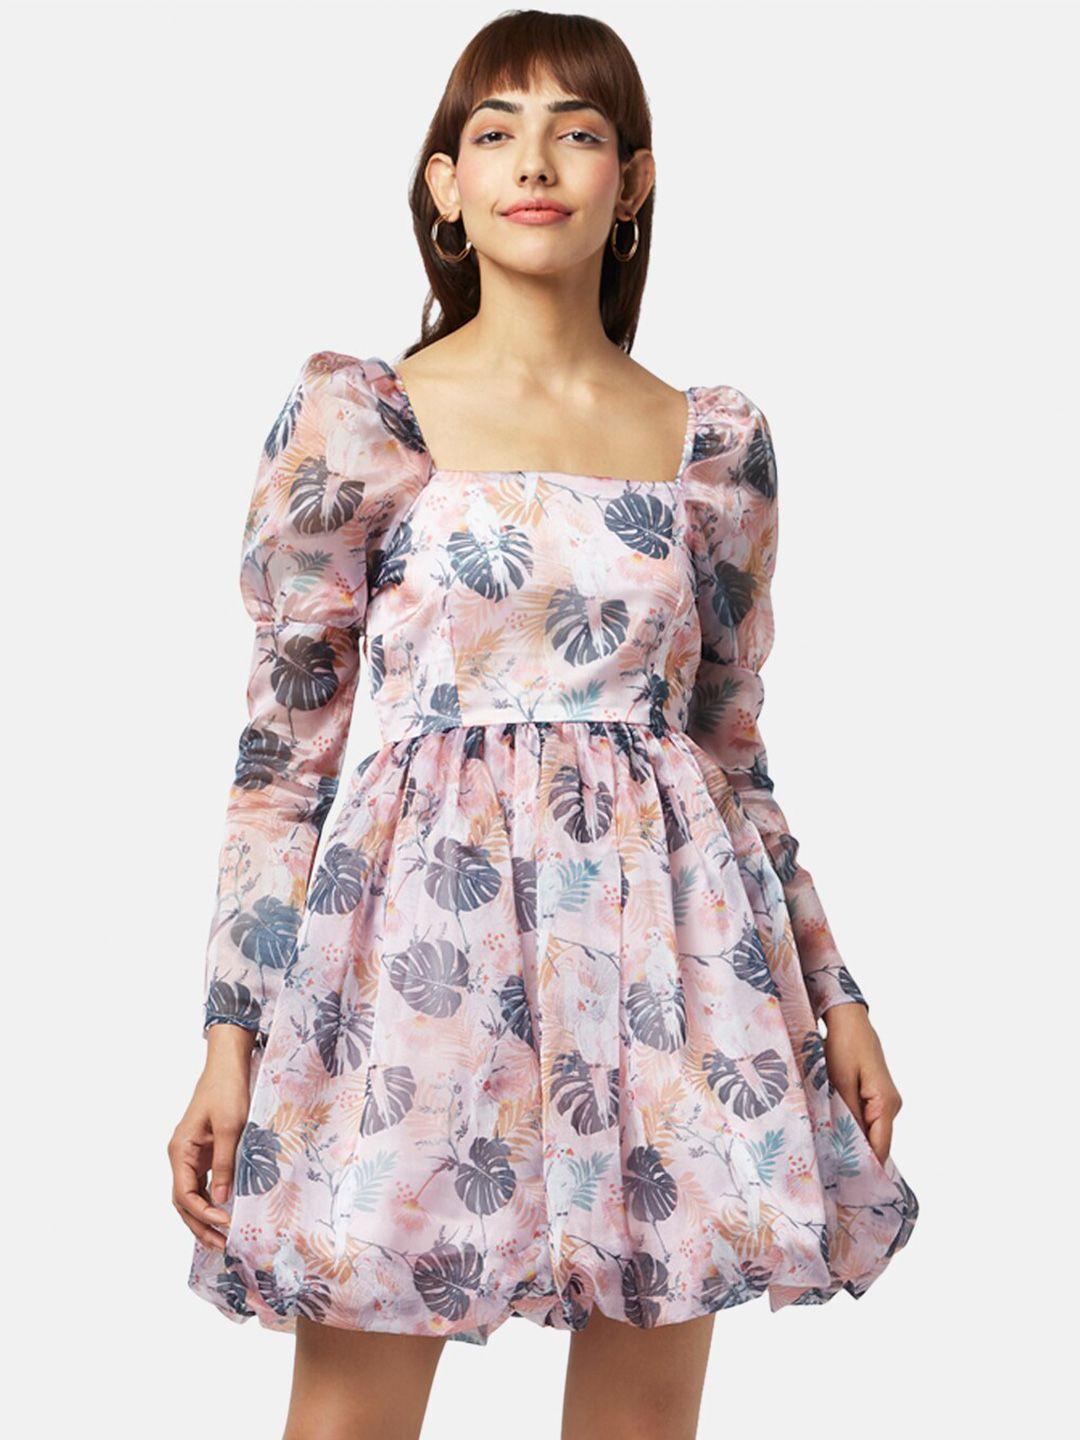 people floral fit and flare dress